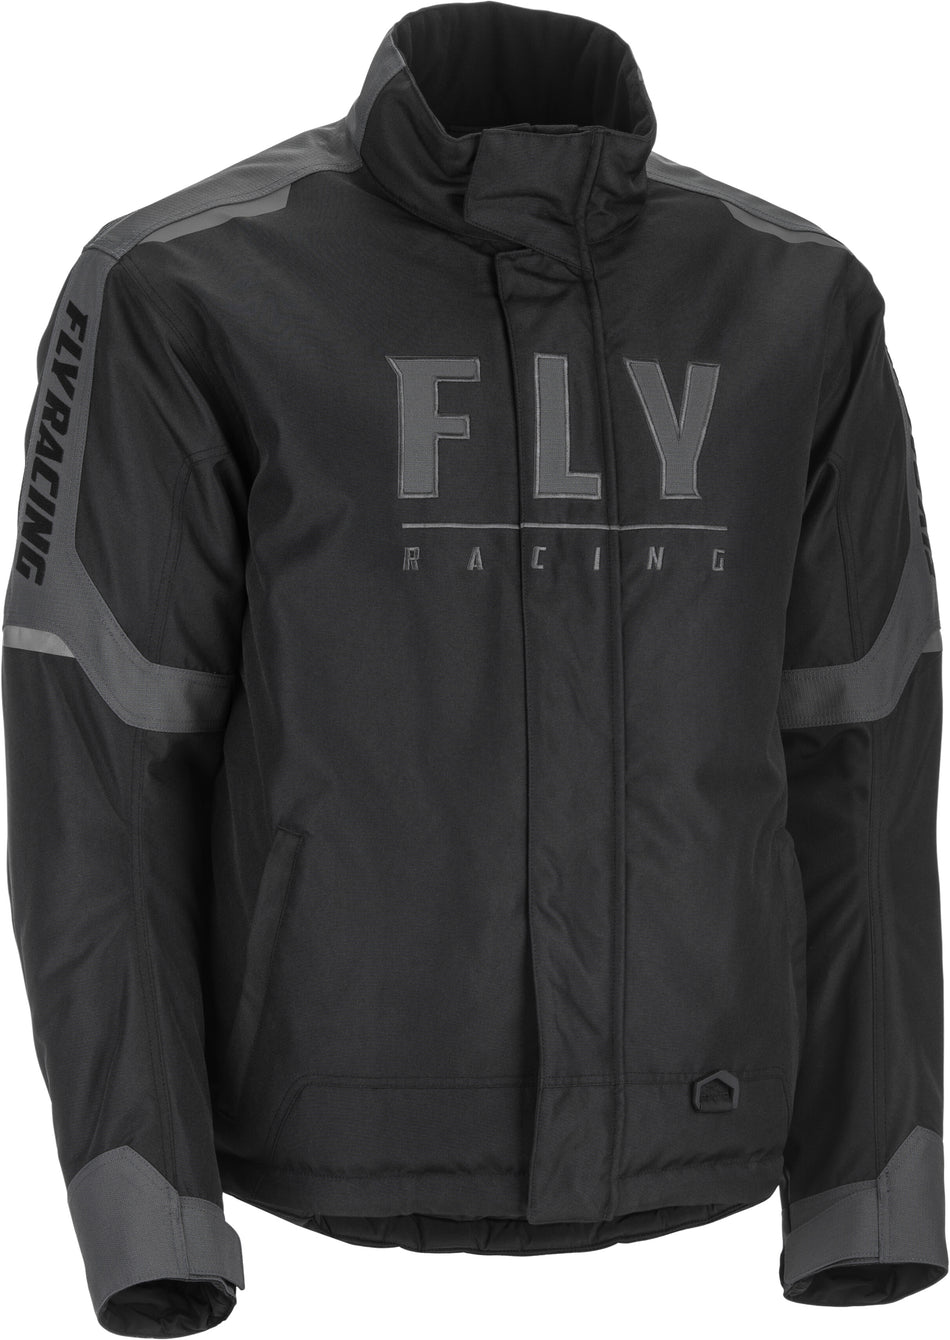 FLY RACING Outpost Jacket Black/Grey Xl 470-4140X